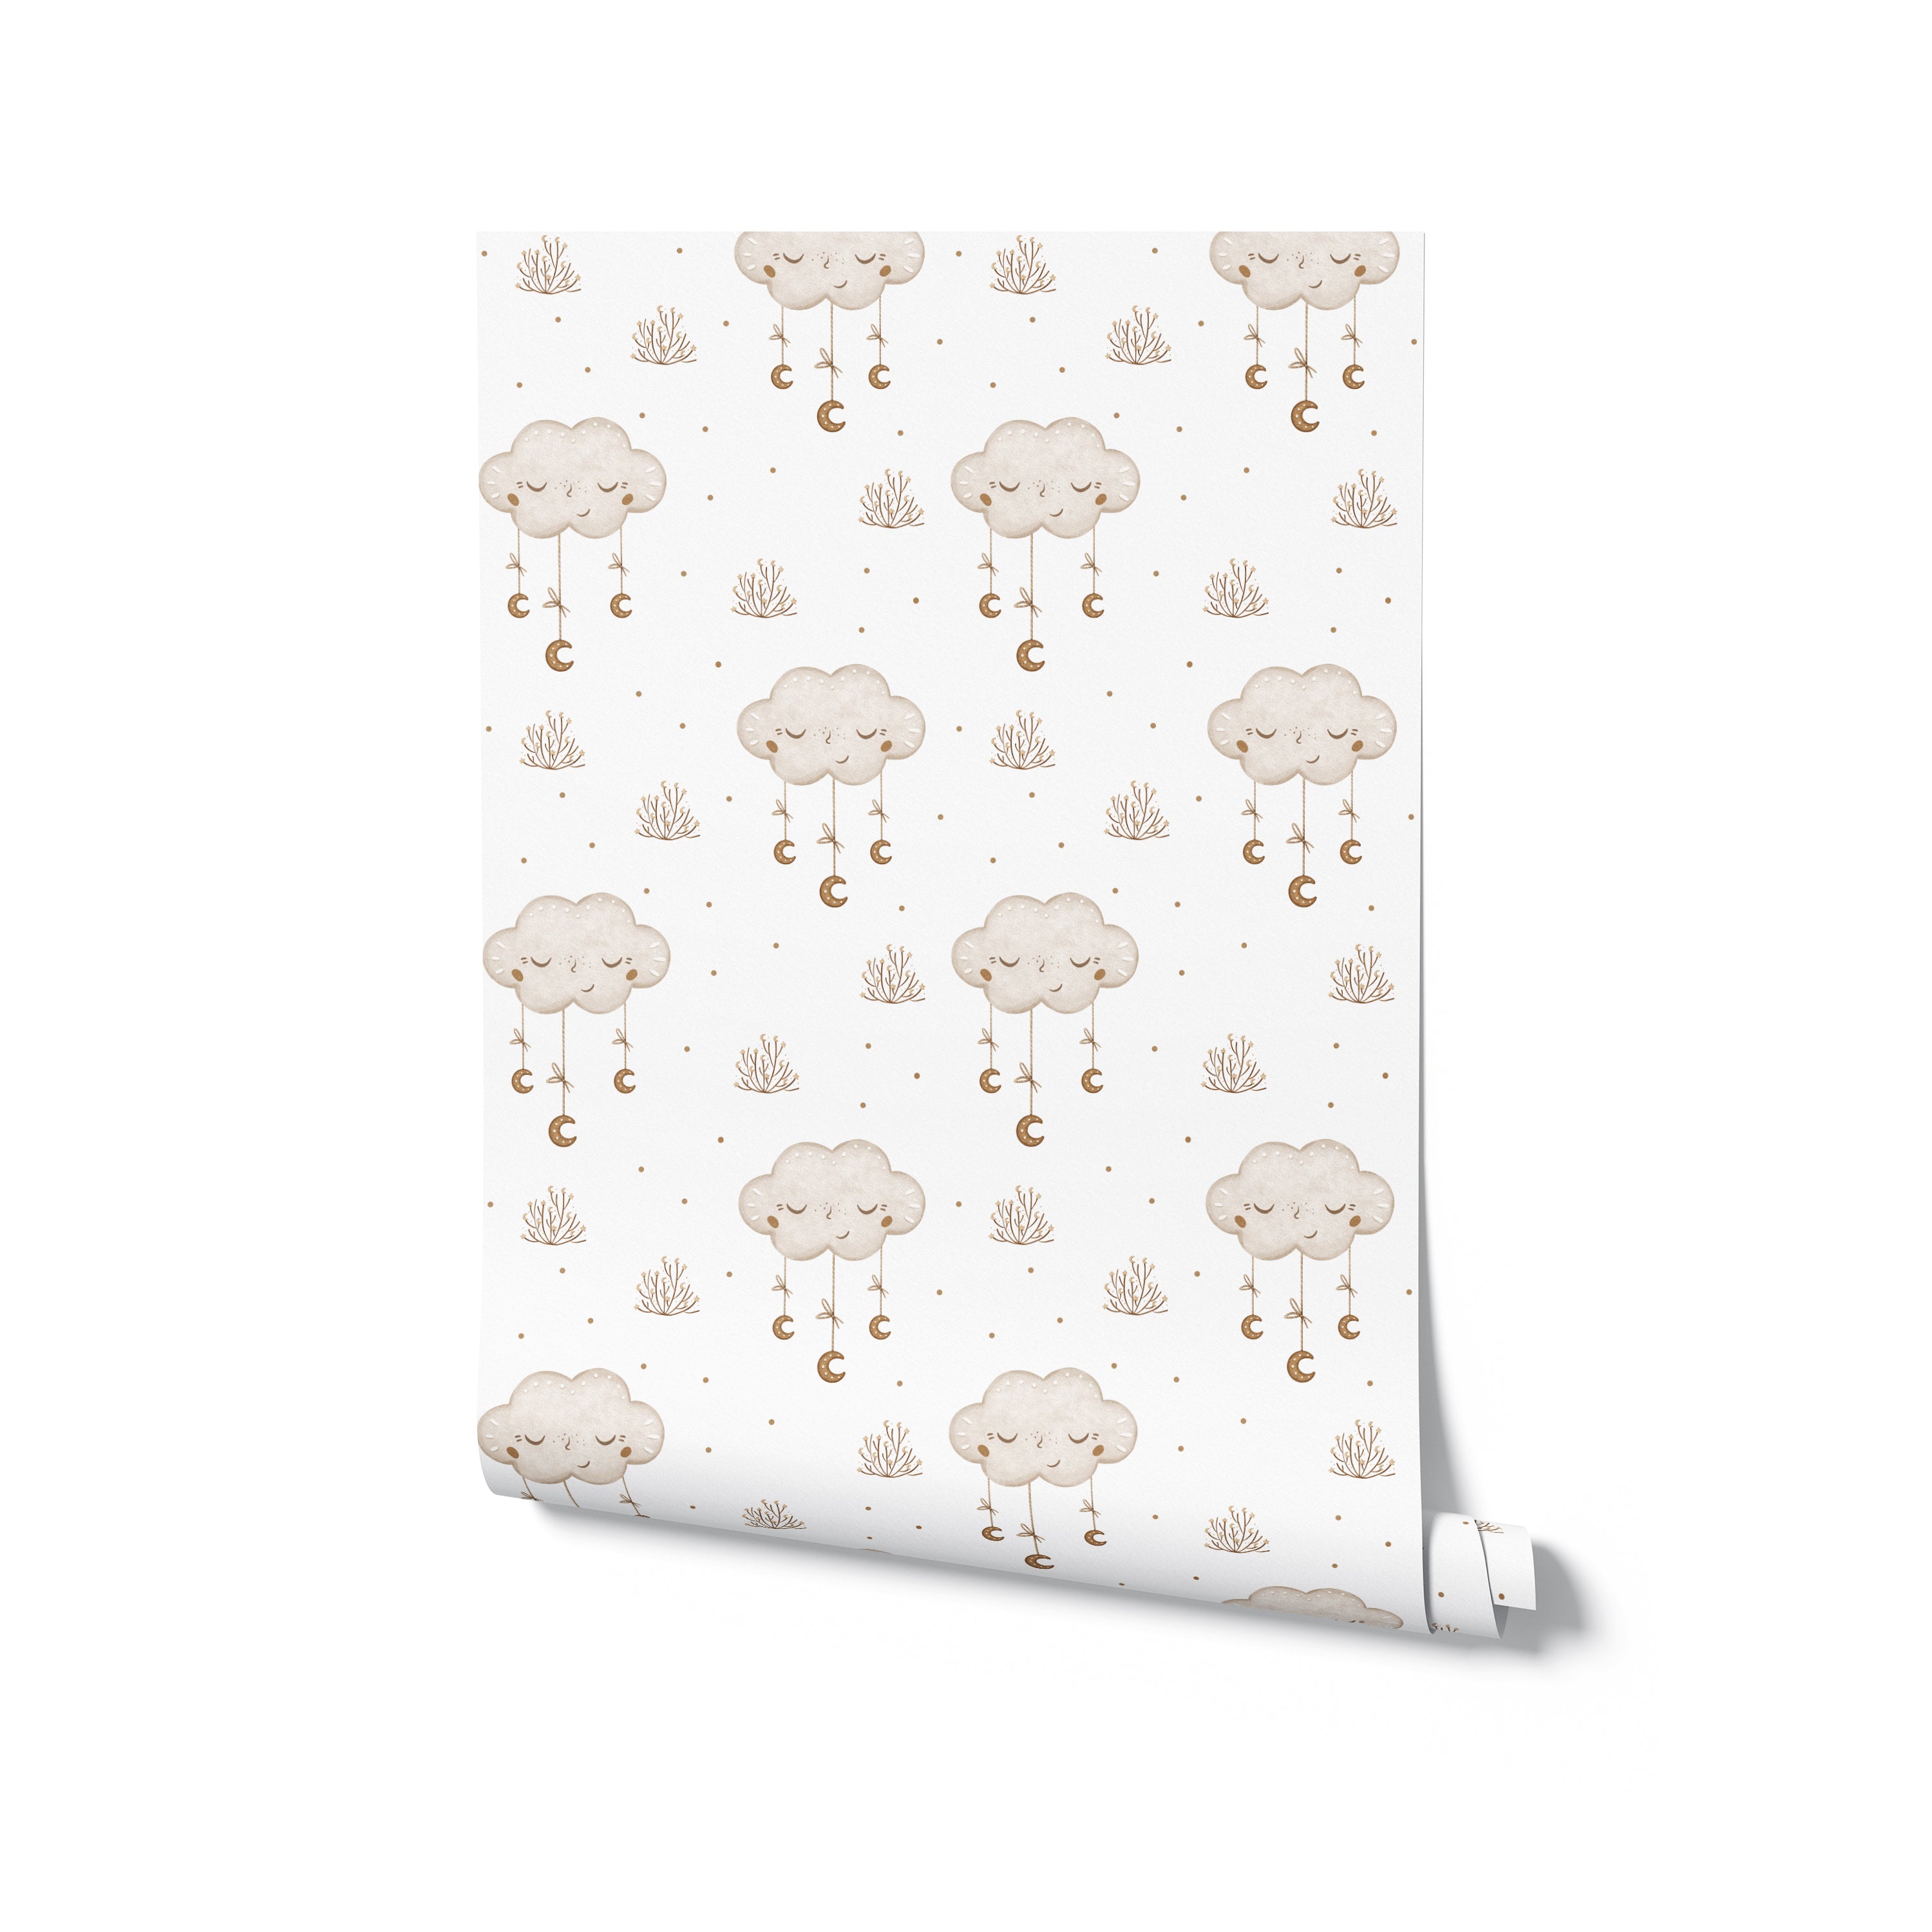 A rolled panel of Sleepy Clouds Wallpaper displaying a whimsical pattern of serene clouds and hanging moons, perfect for a dreamy nursery theme.